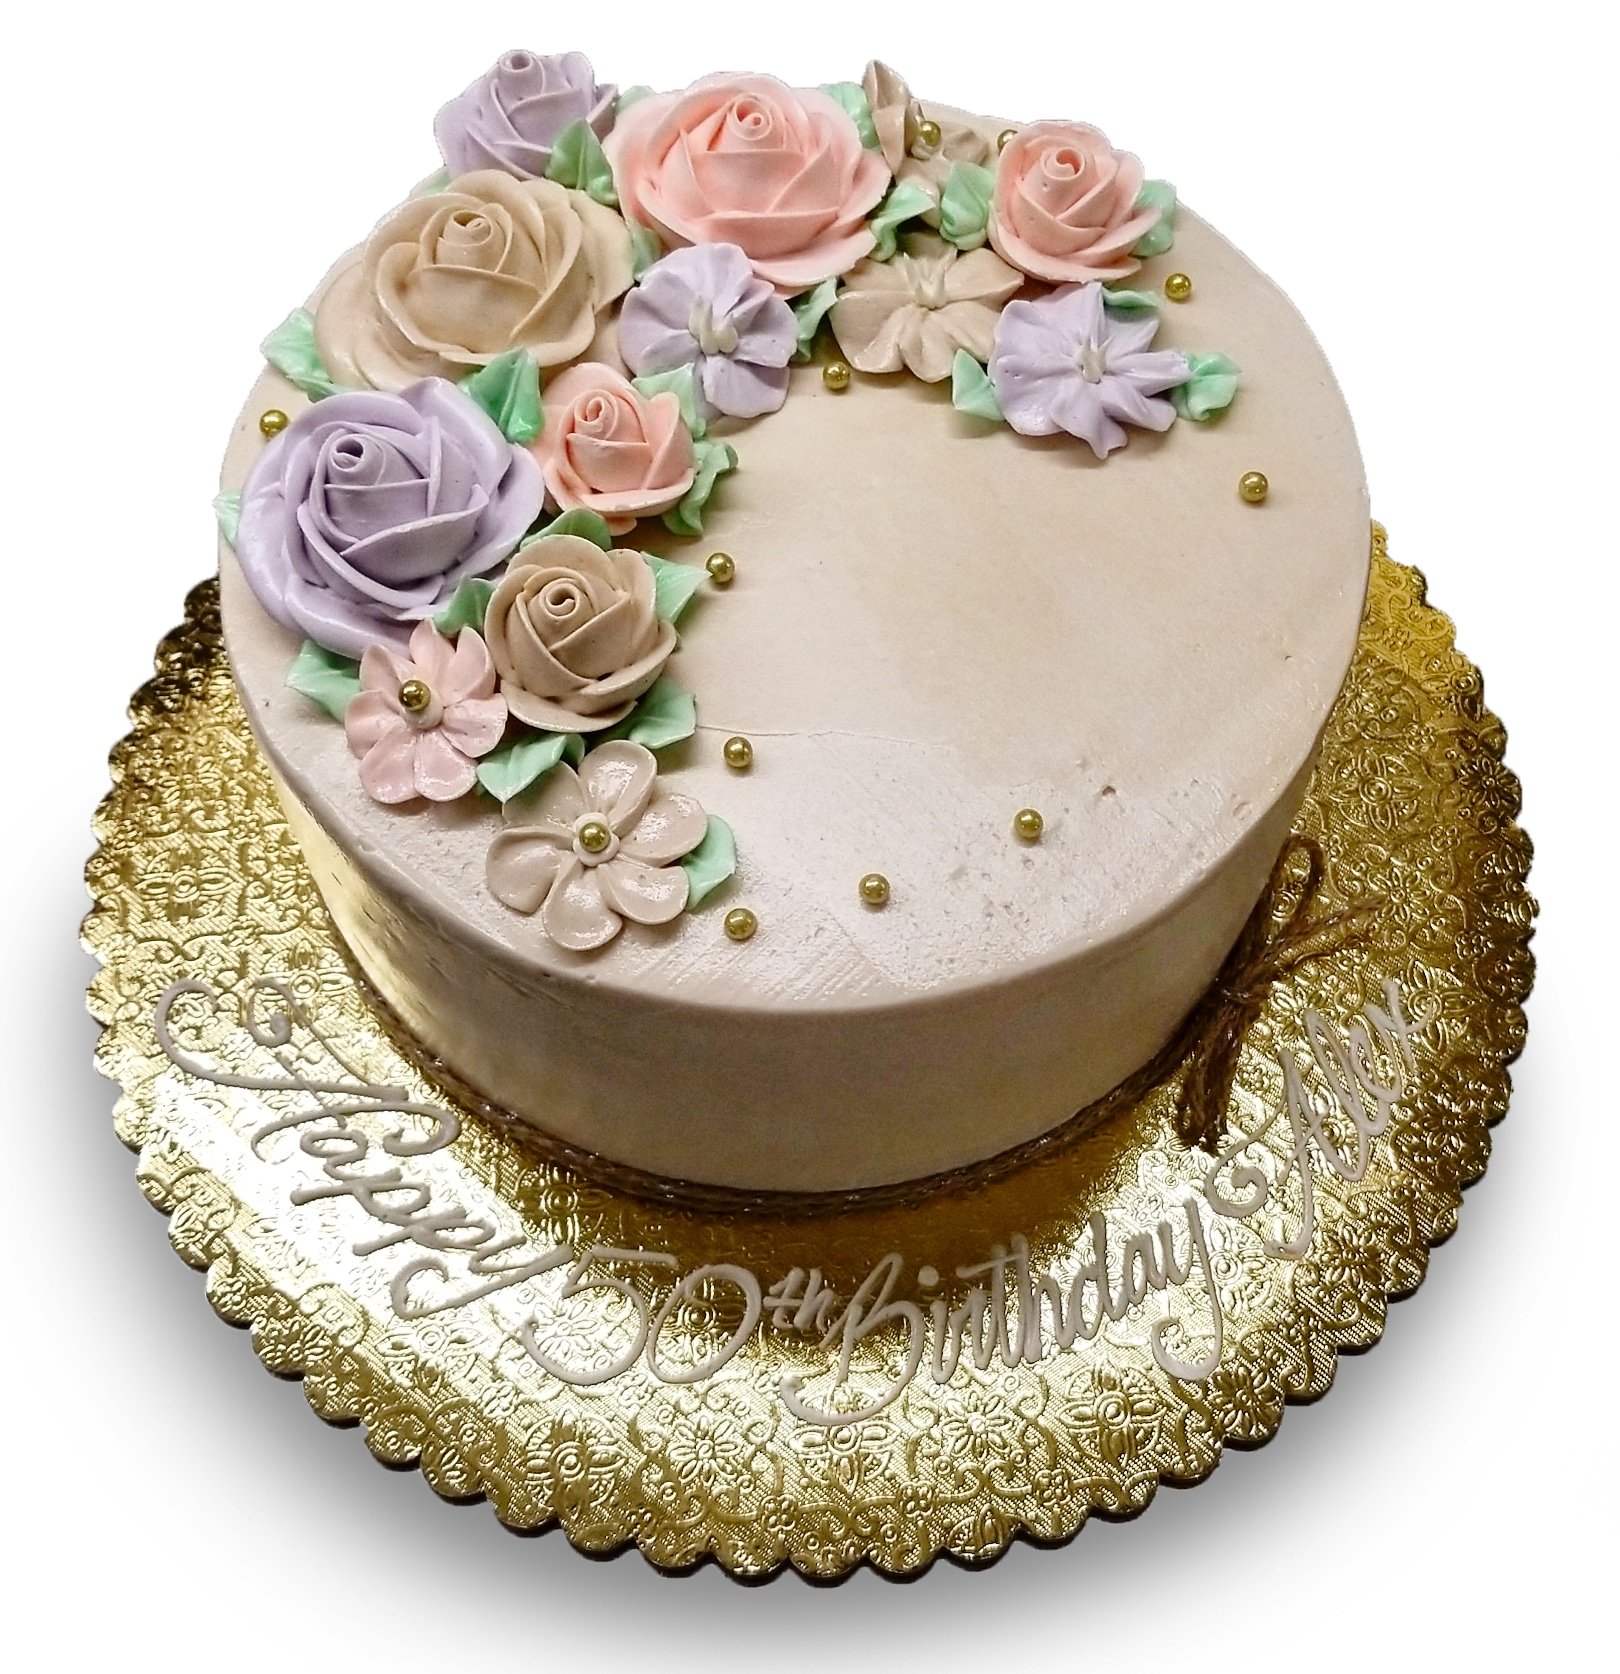 AB008. Birthday cake with pastel flowers in beige, lavender and blush